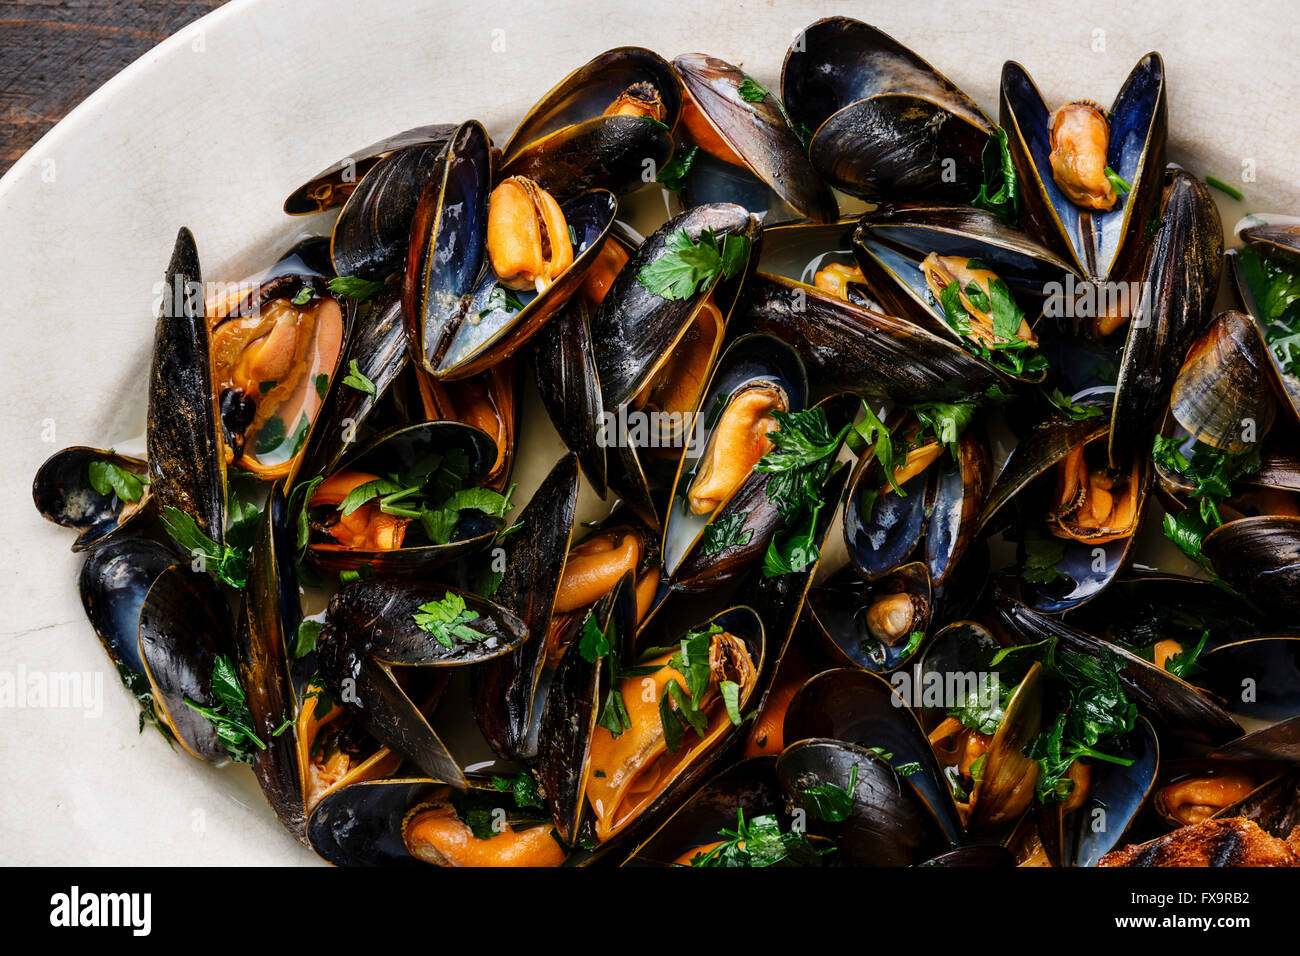 Mussels with parsley on plate close up Stock Photo